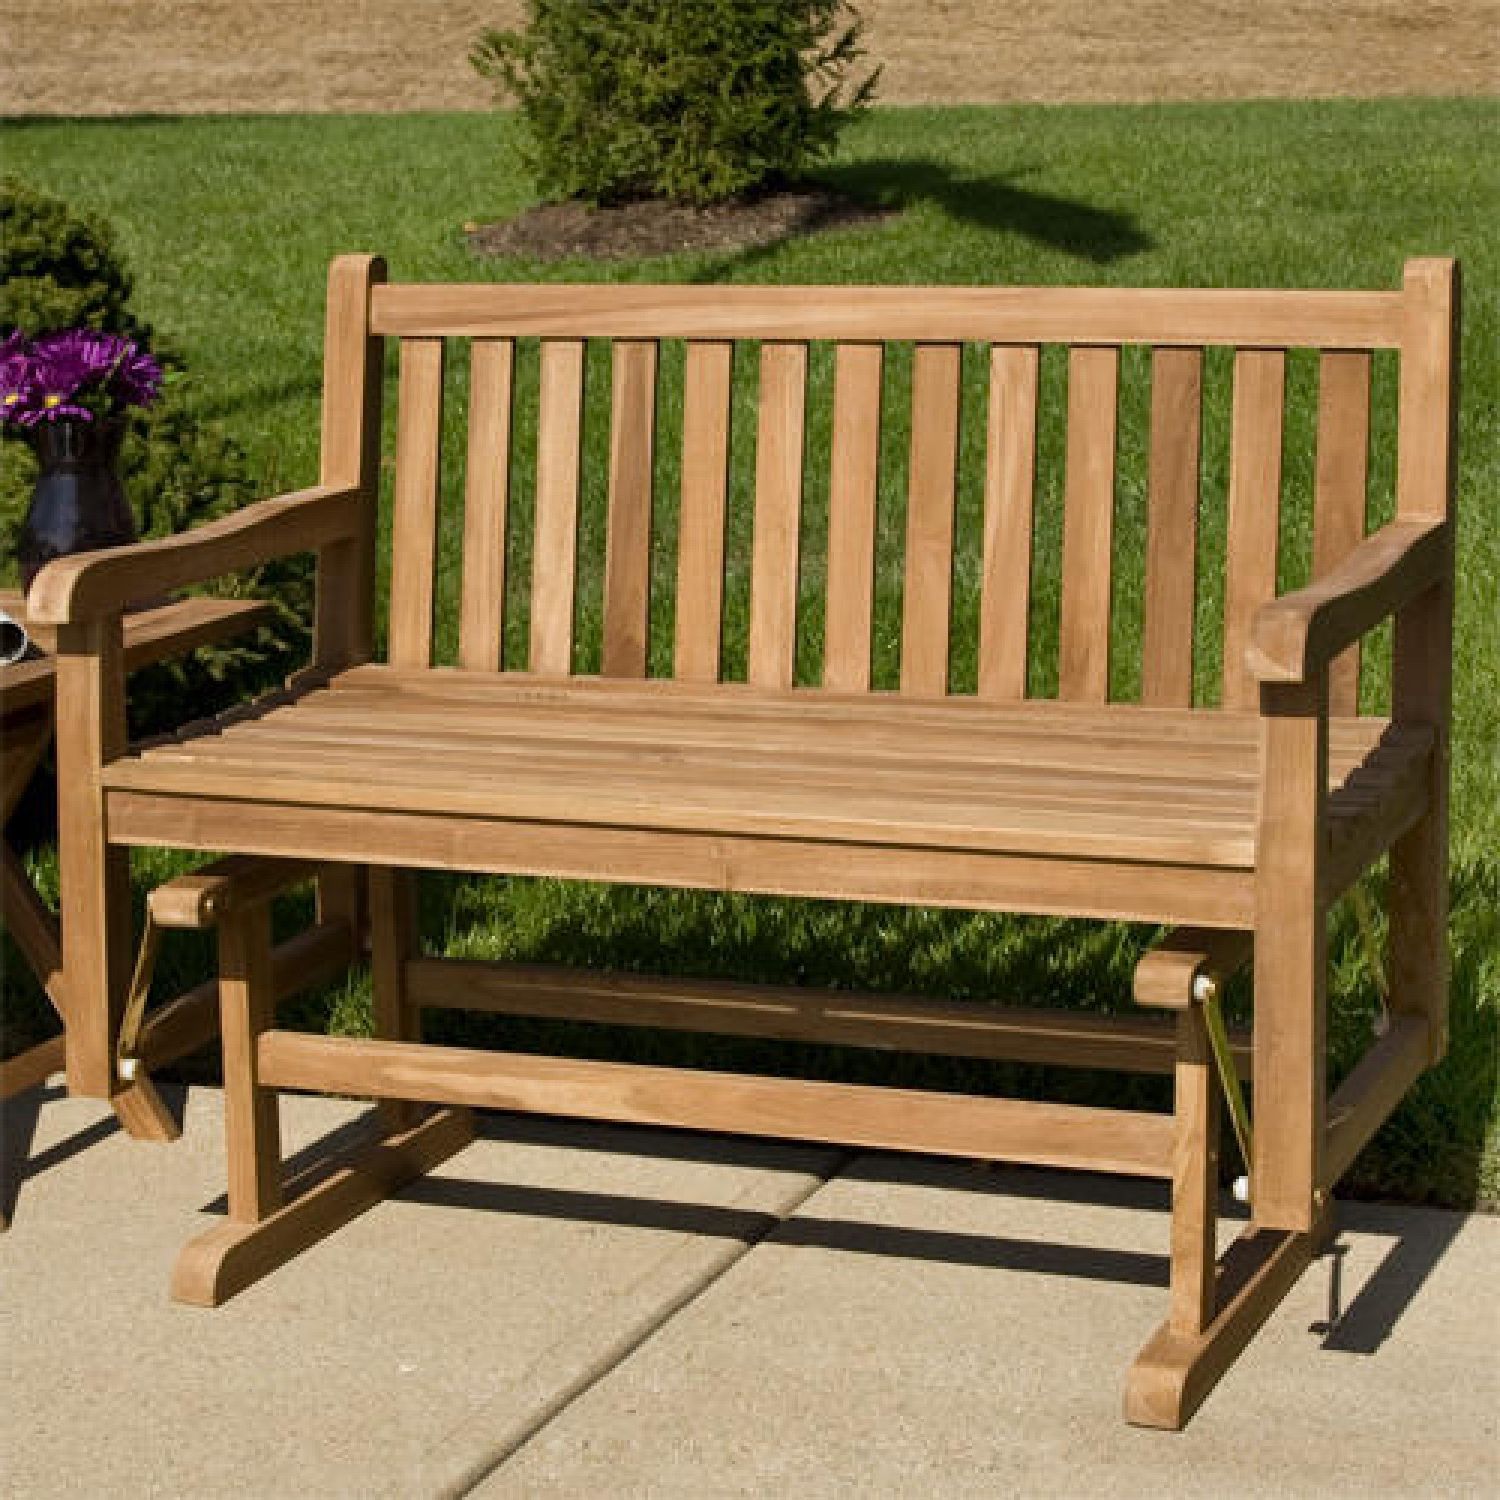 2019 Teak Outdoor Glider Benches Throughout Build Outdoor Glider Bench : Outdoor Decorations – What Is (View 11 of 30)